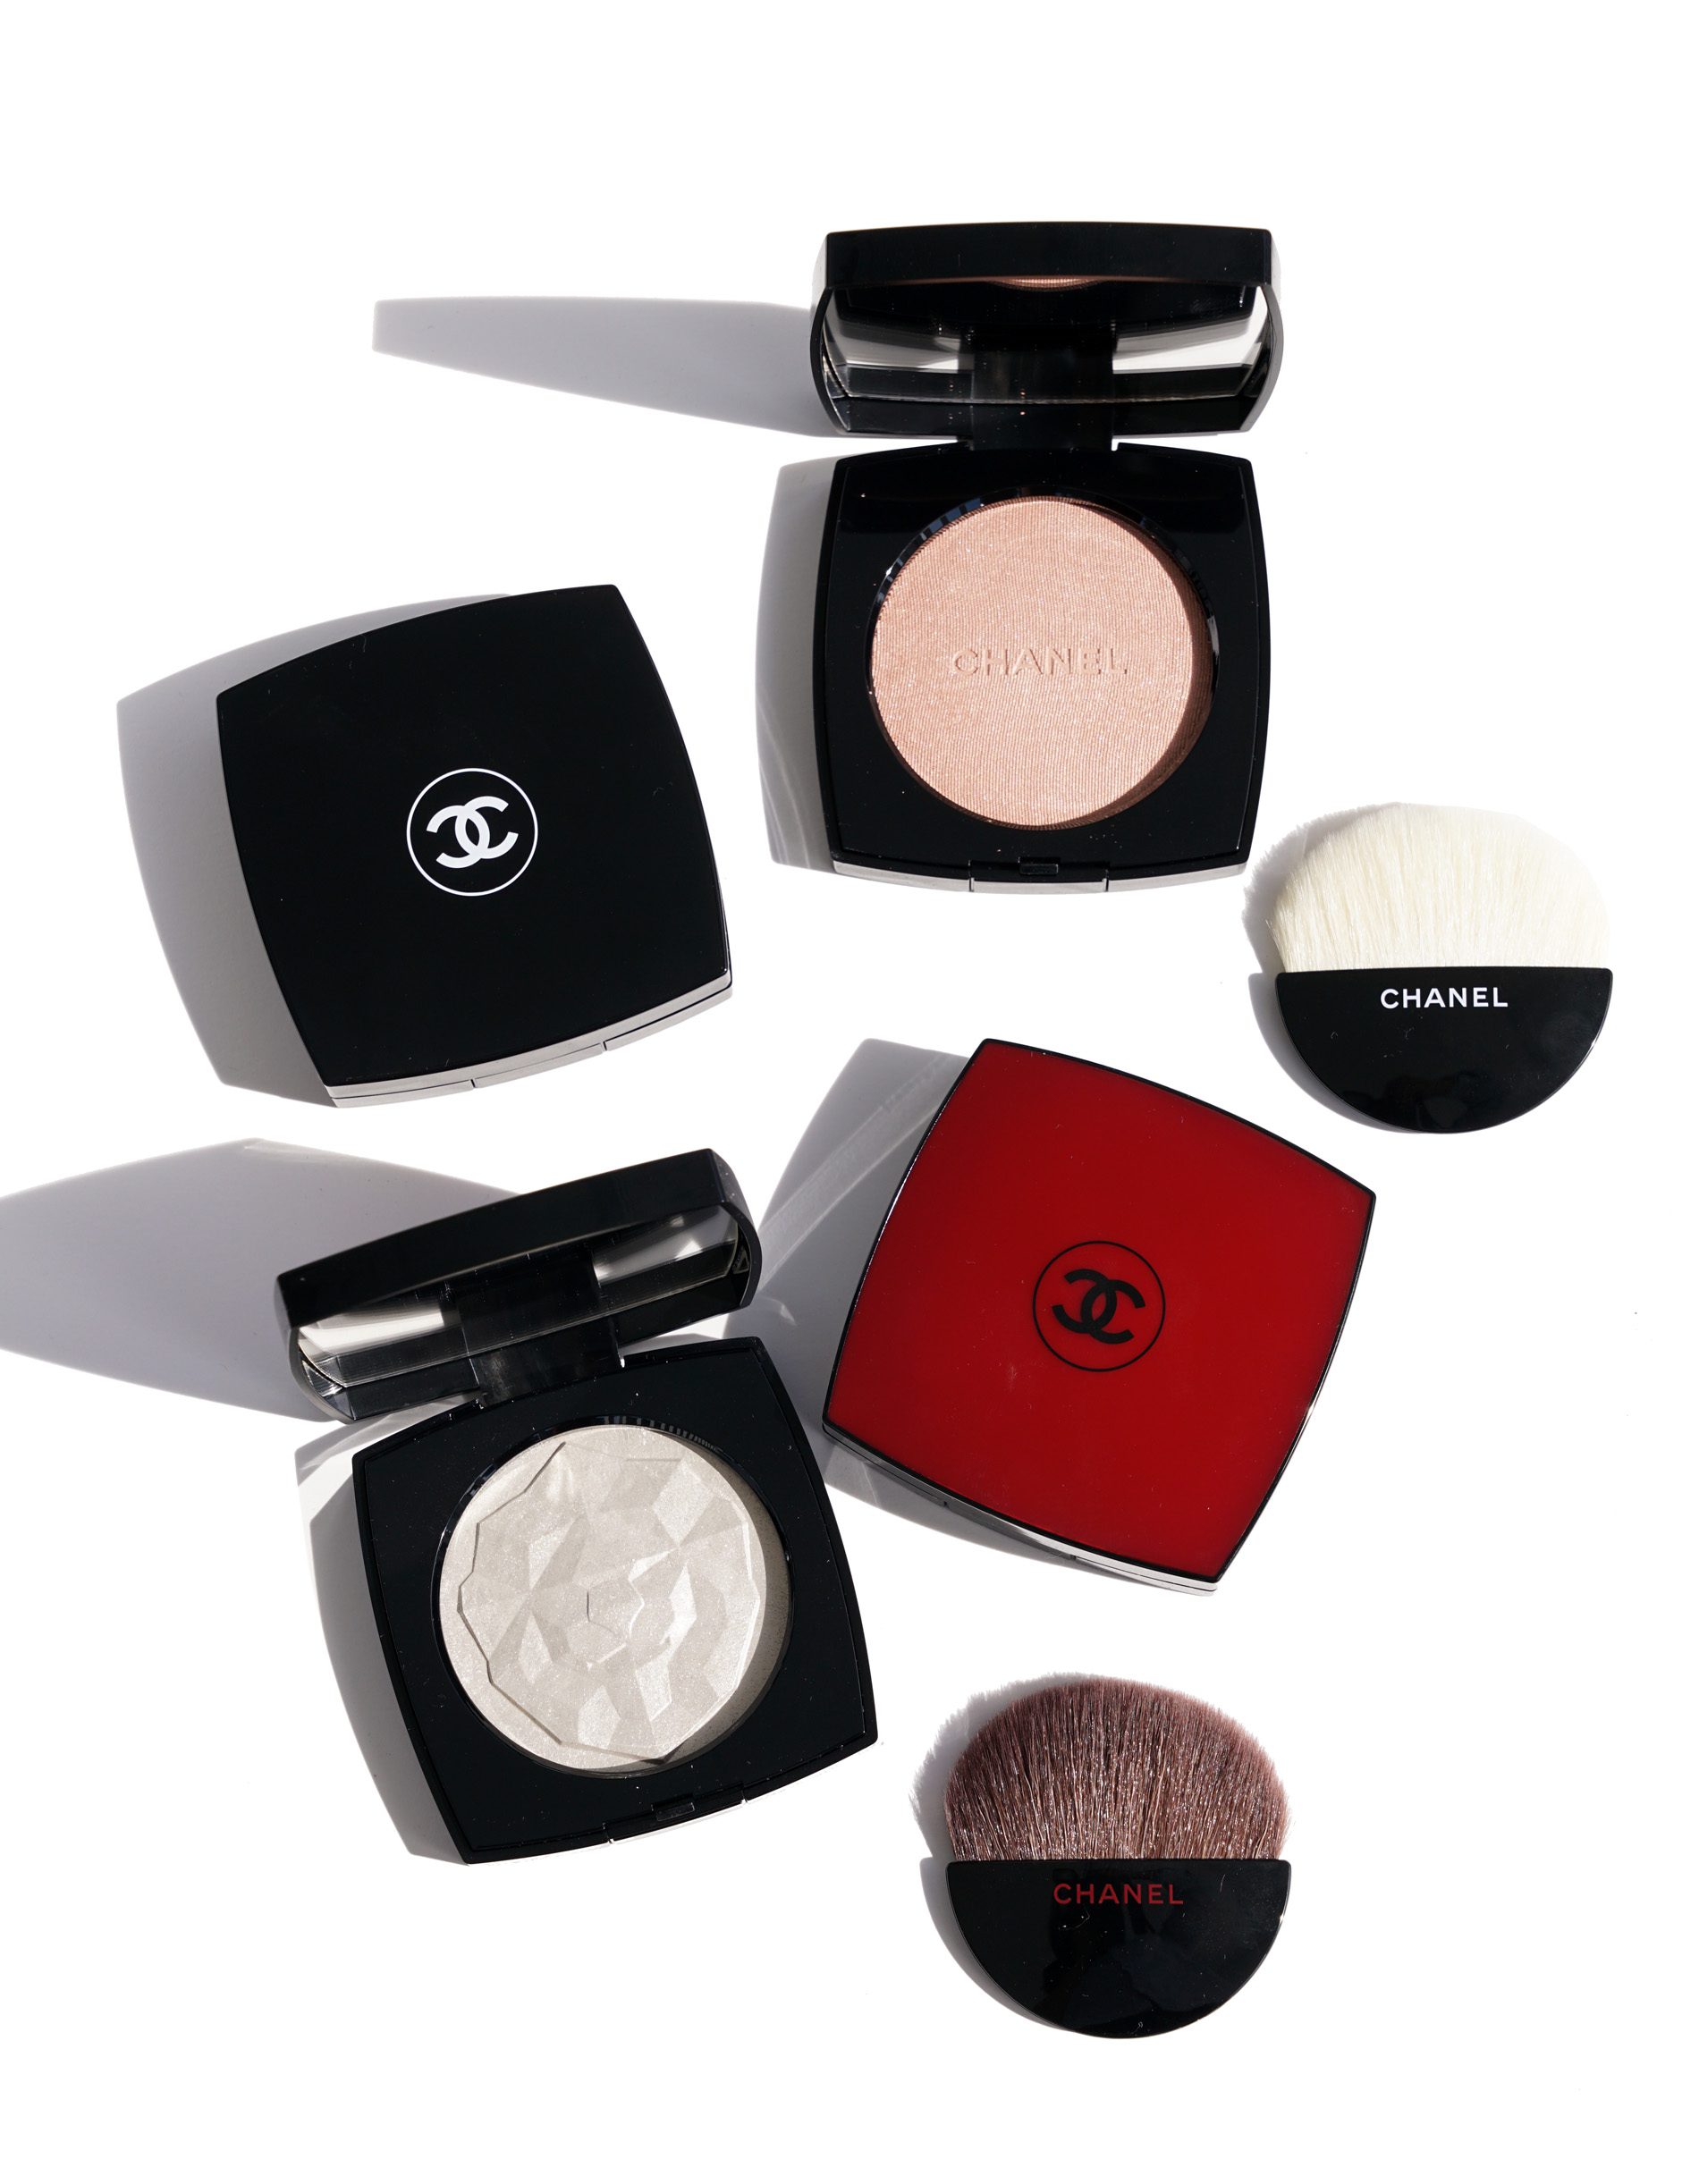 CHANEL Face Makeup Highlighters for sale